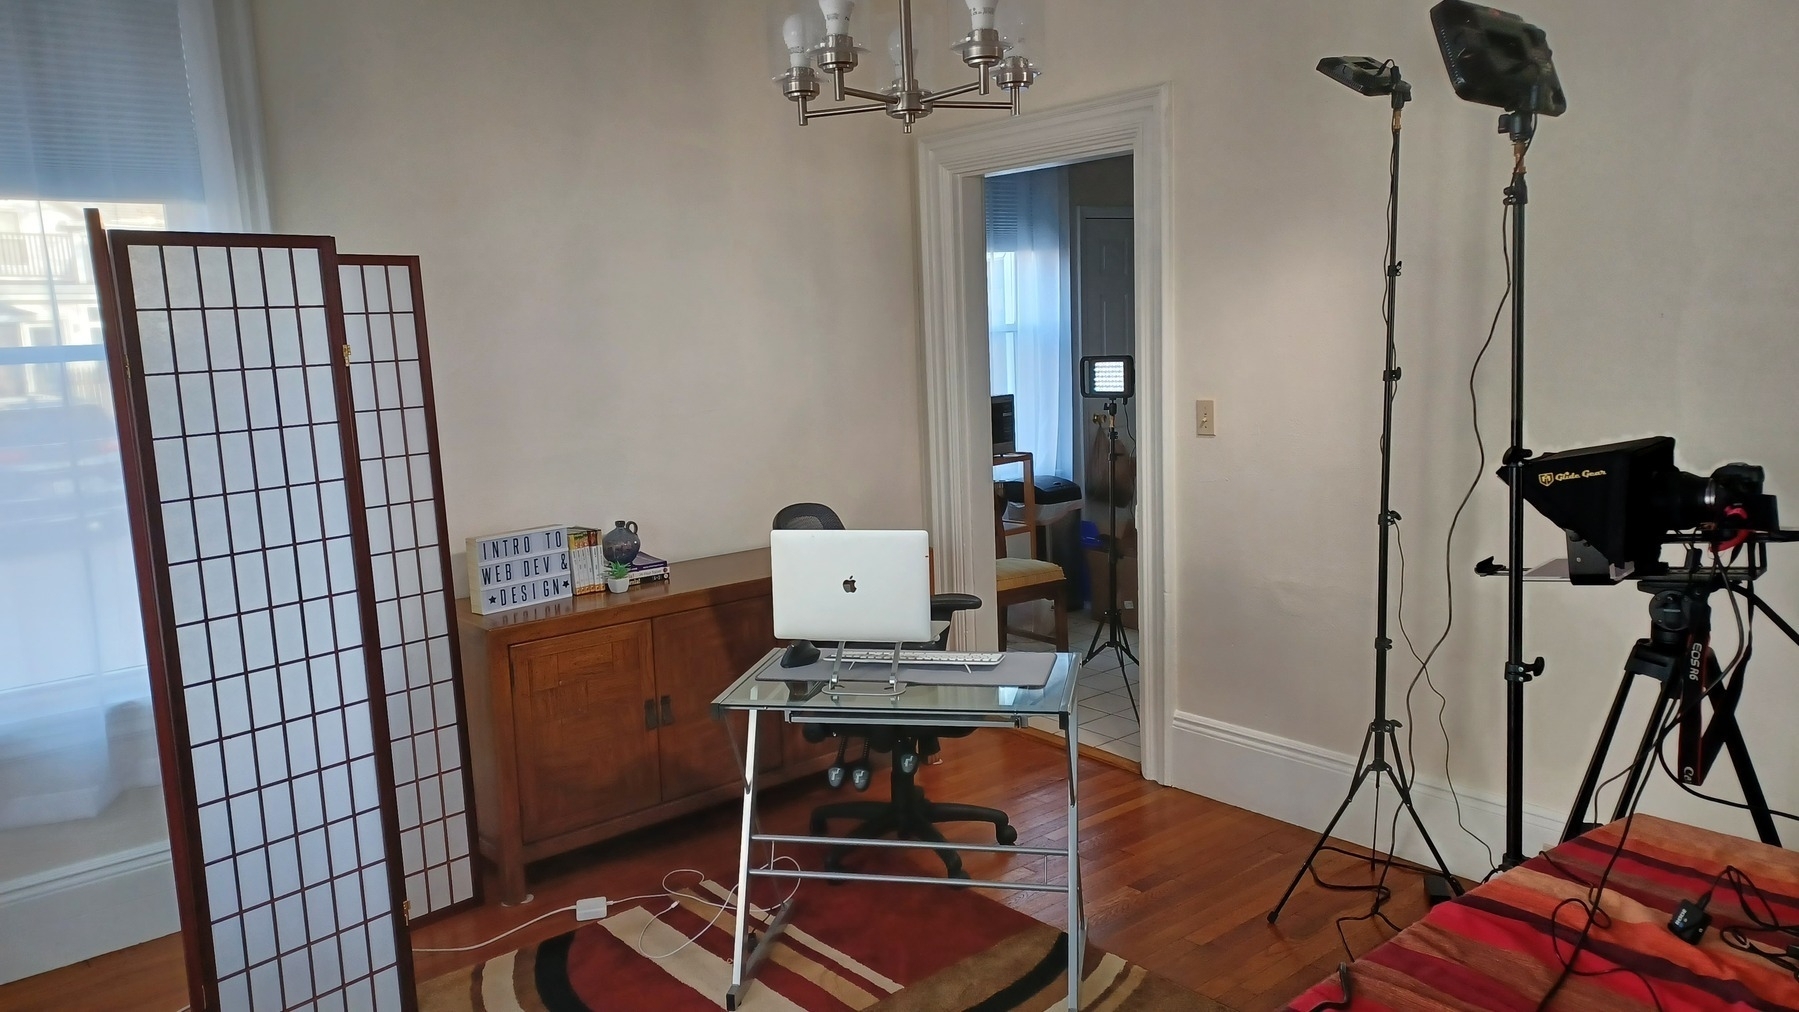 Teleprompter, lights, desk, chair, and screen.